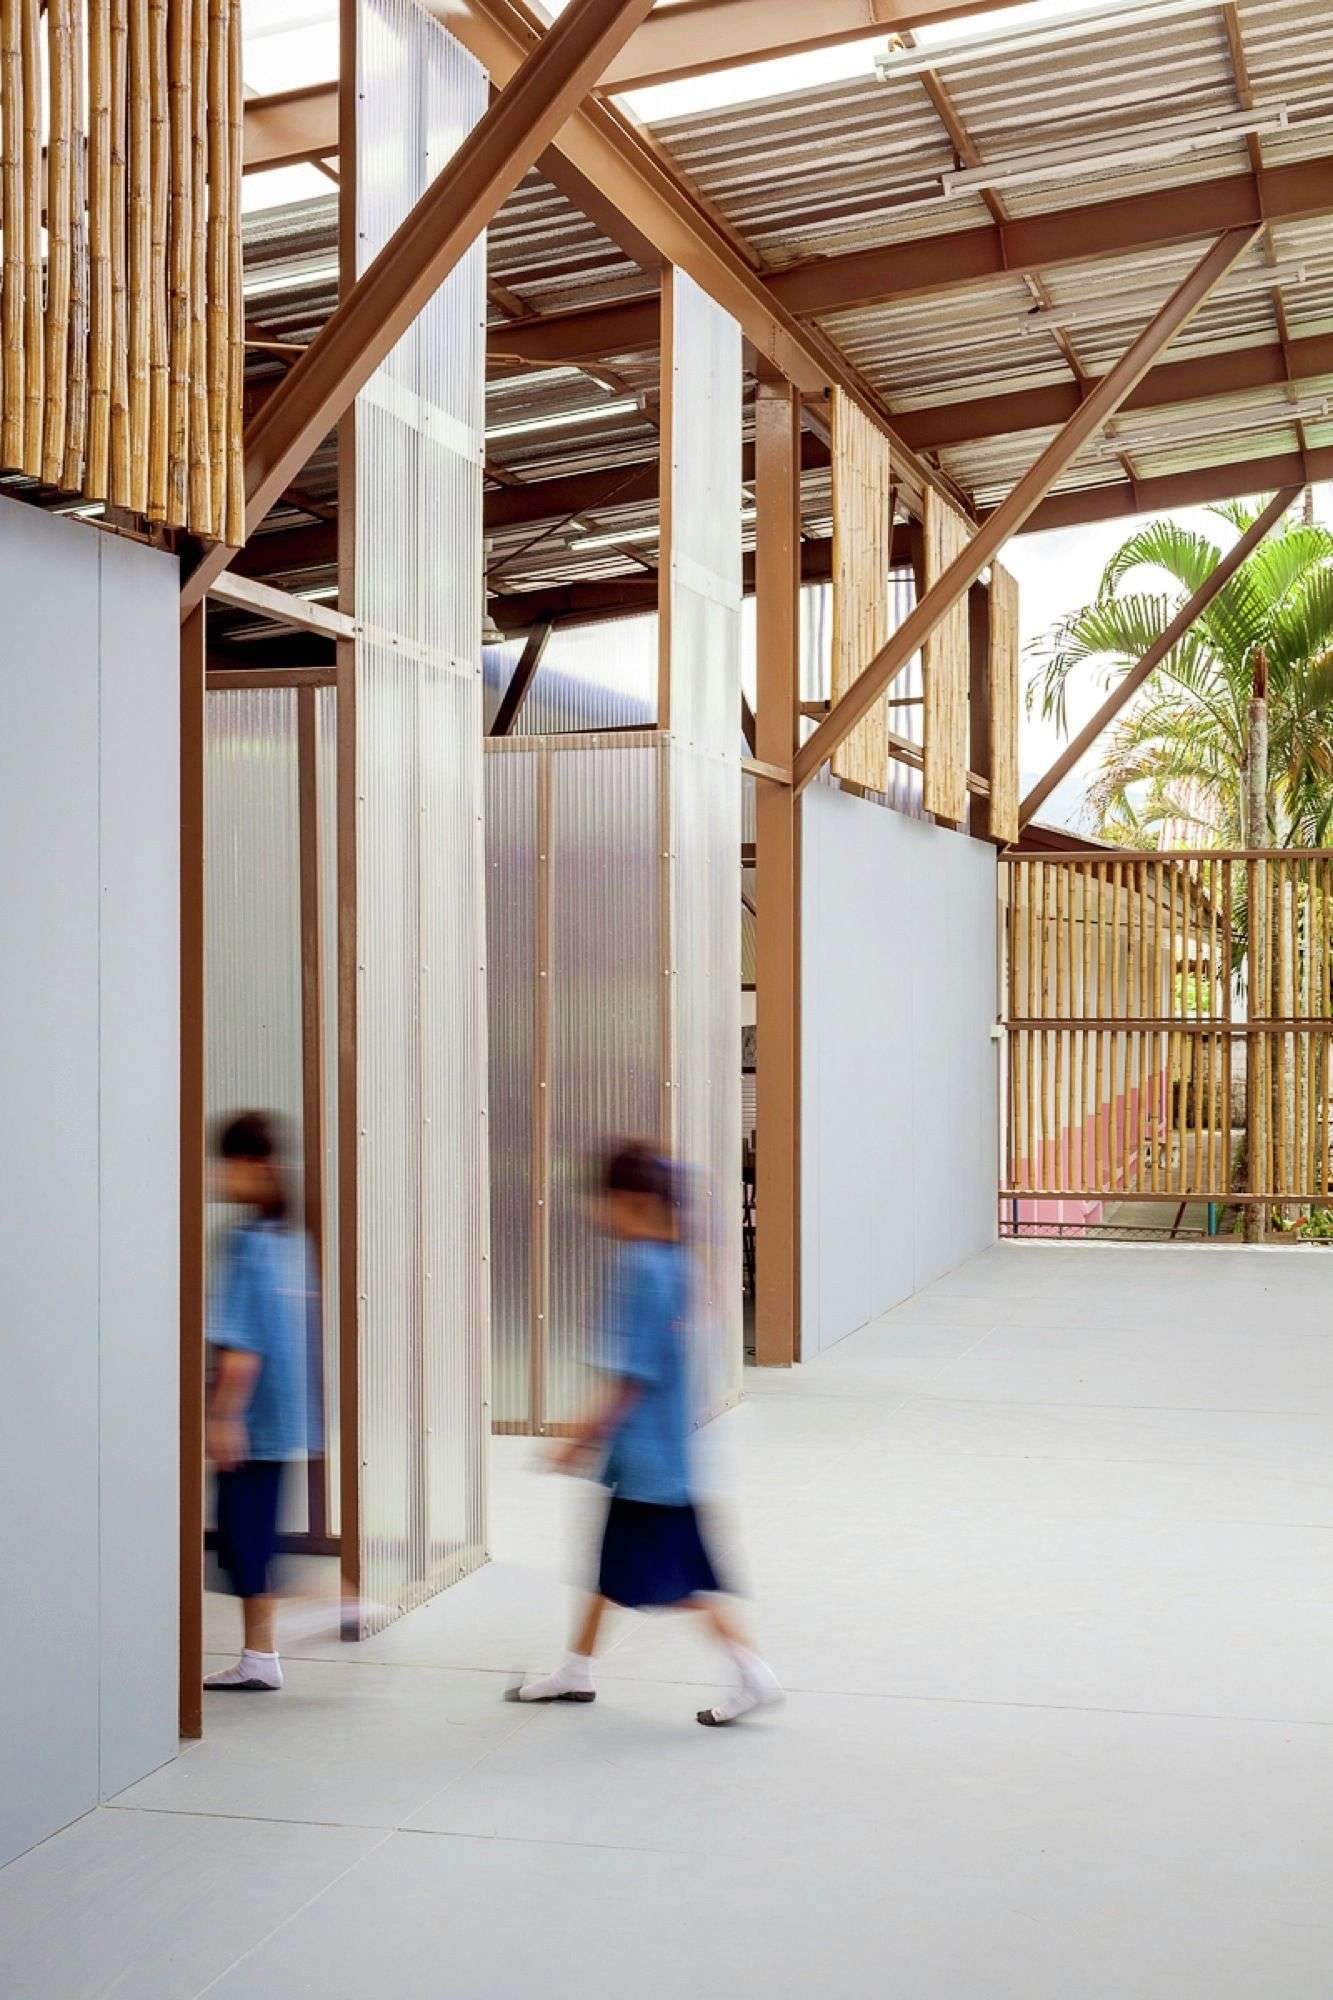 The pavilion-like Baan Nong Bua School has large roof cantilevers, is raised off the…